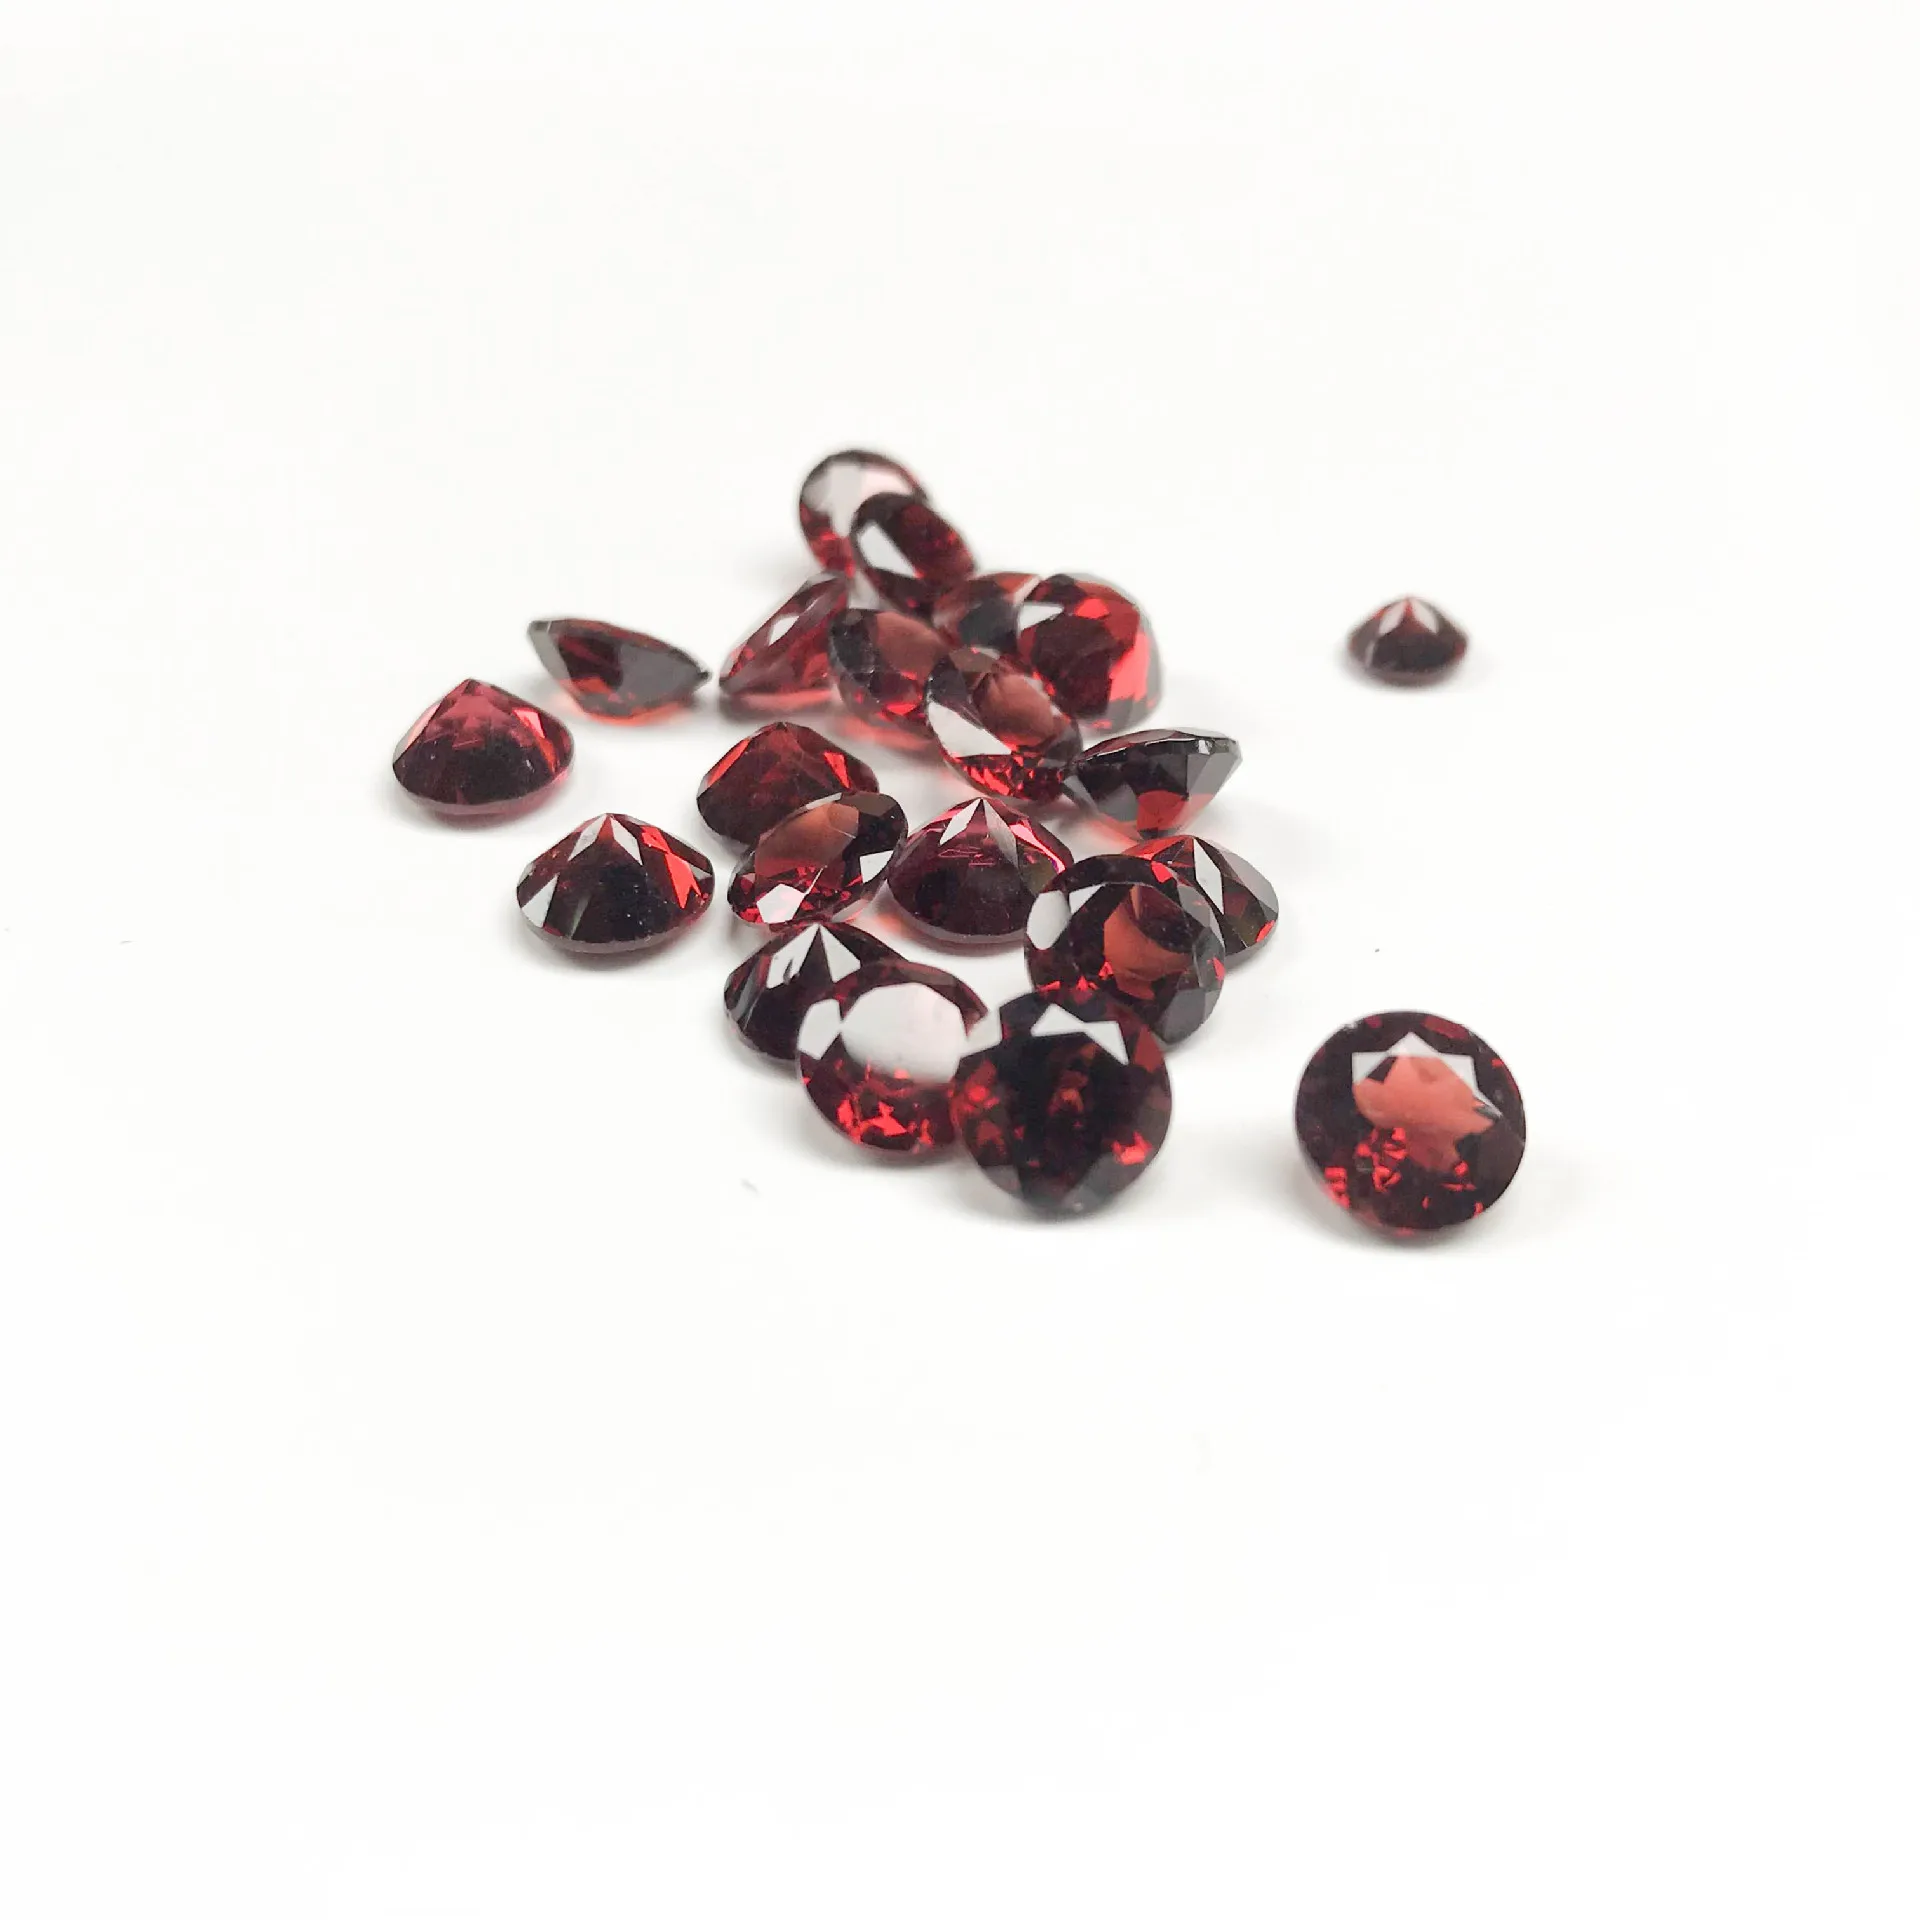 Size is 6 mm #1686 7.5 inches Natural Faceted Garnet Round Cutstone